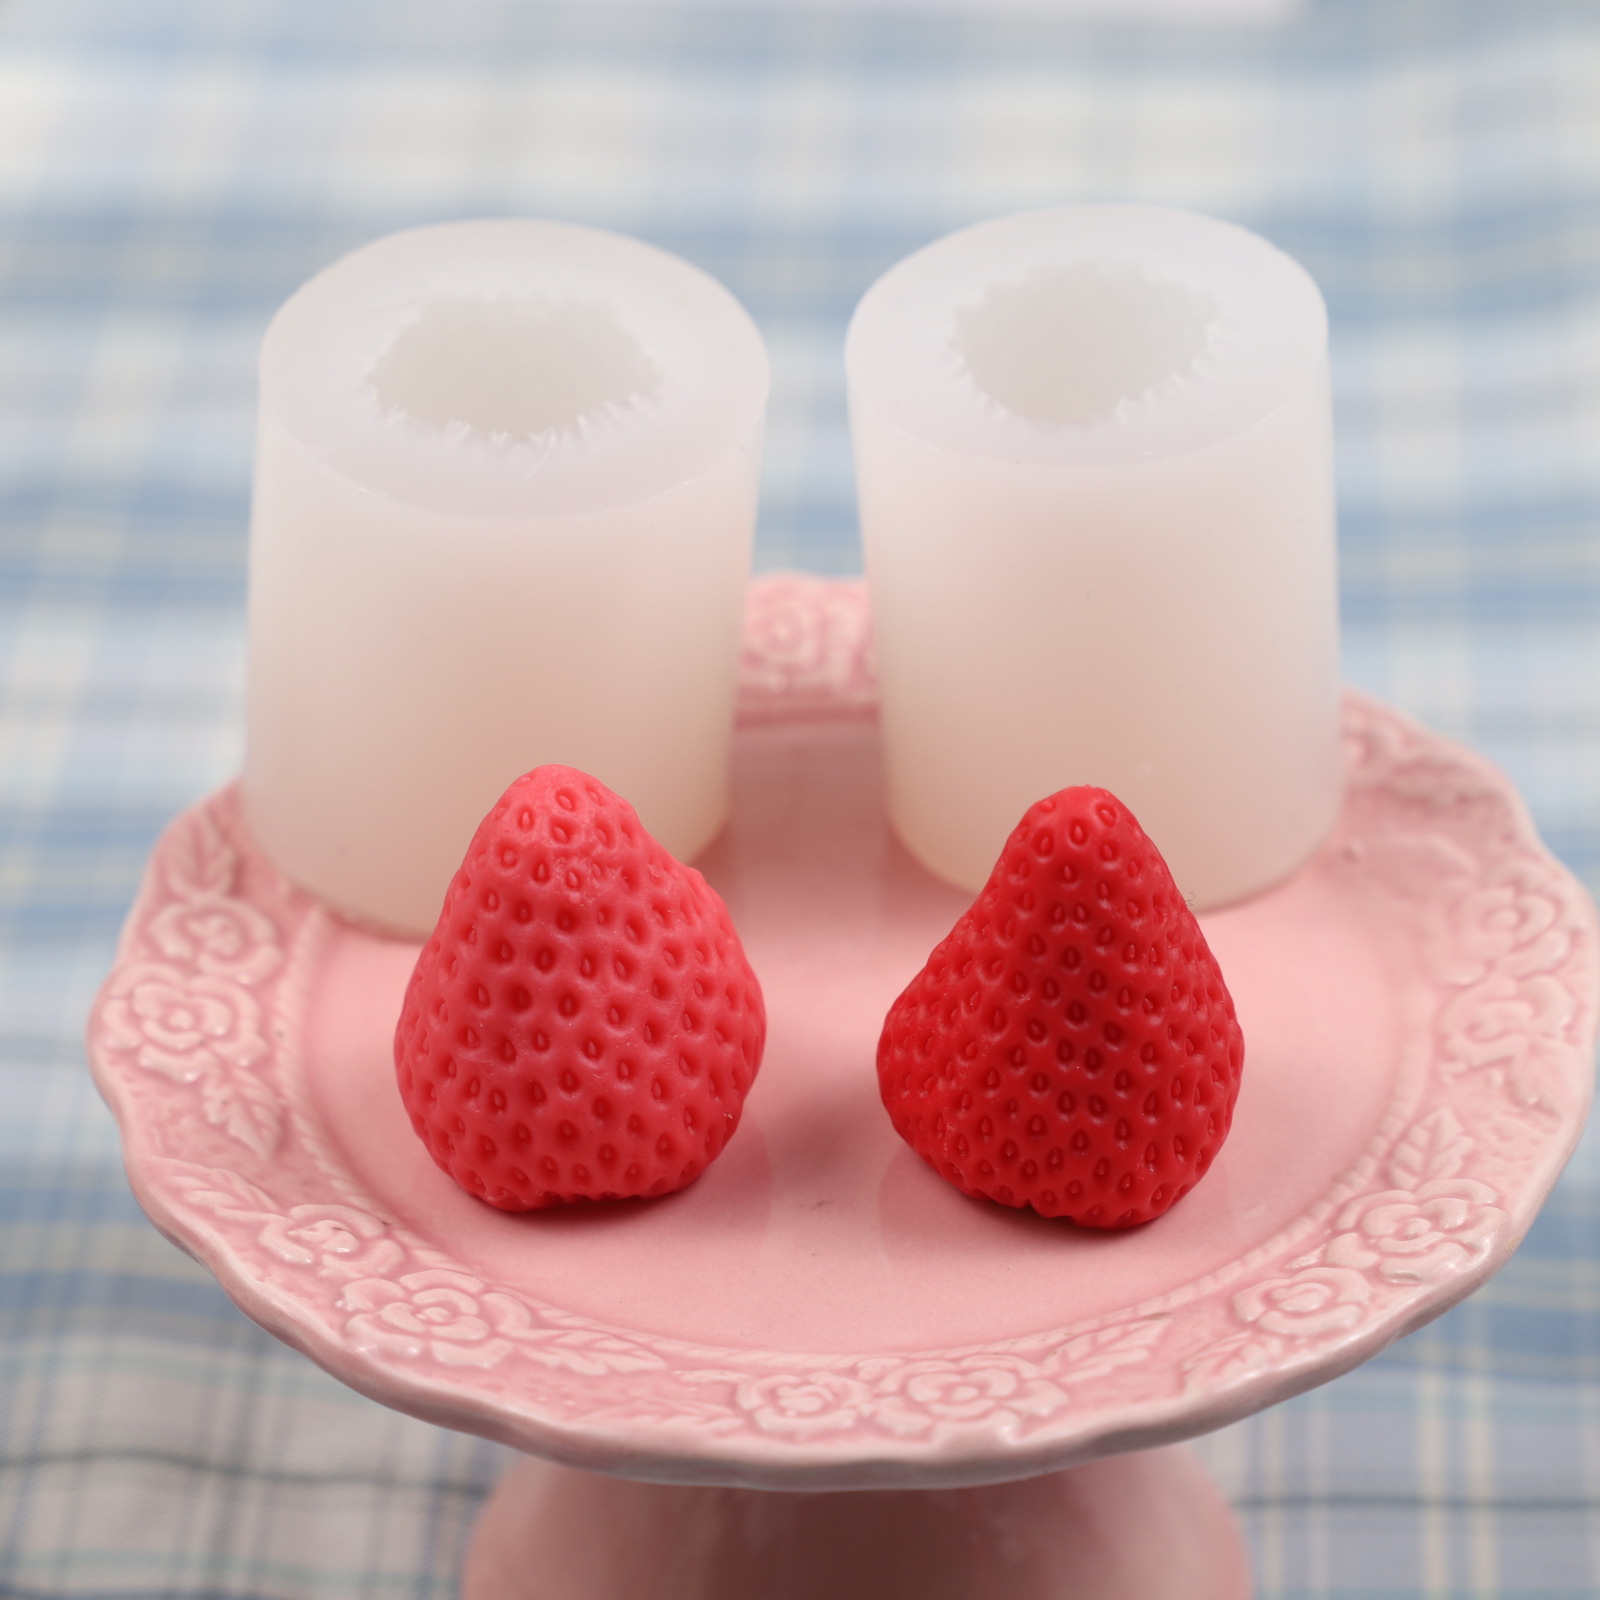 Strawberry Mold Silicone Candle Soap Making Tool DIY Chocolate Cake Ice  Jelly Fruit Silicone Cake Moulds Target Tray 15 Cavity From  Ecofriendlyshop, $6.73